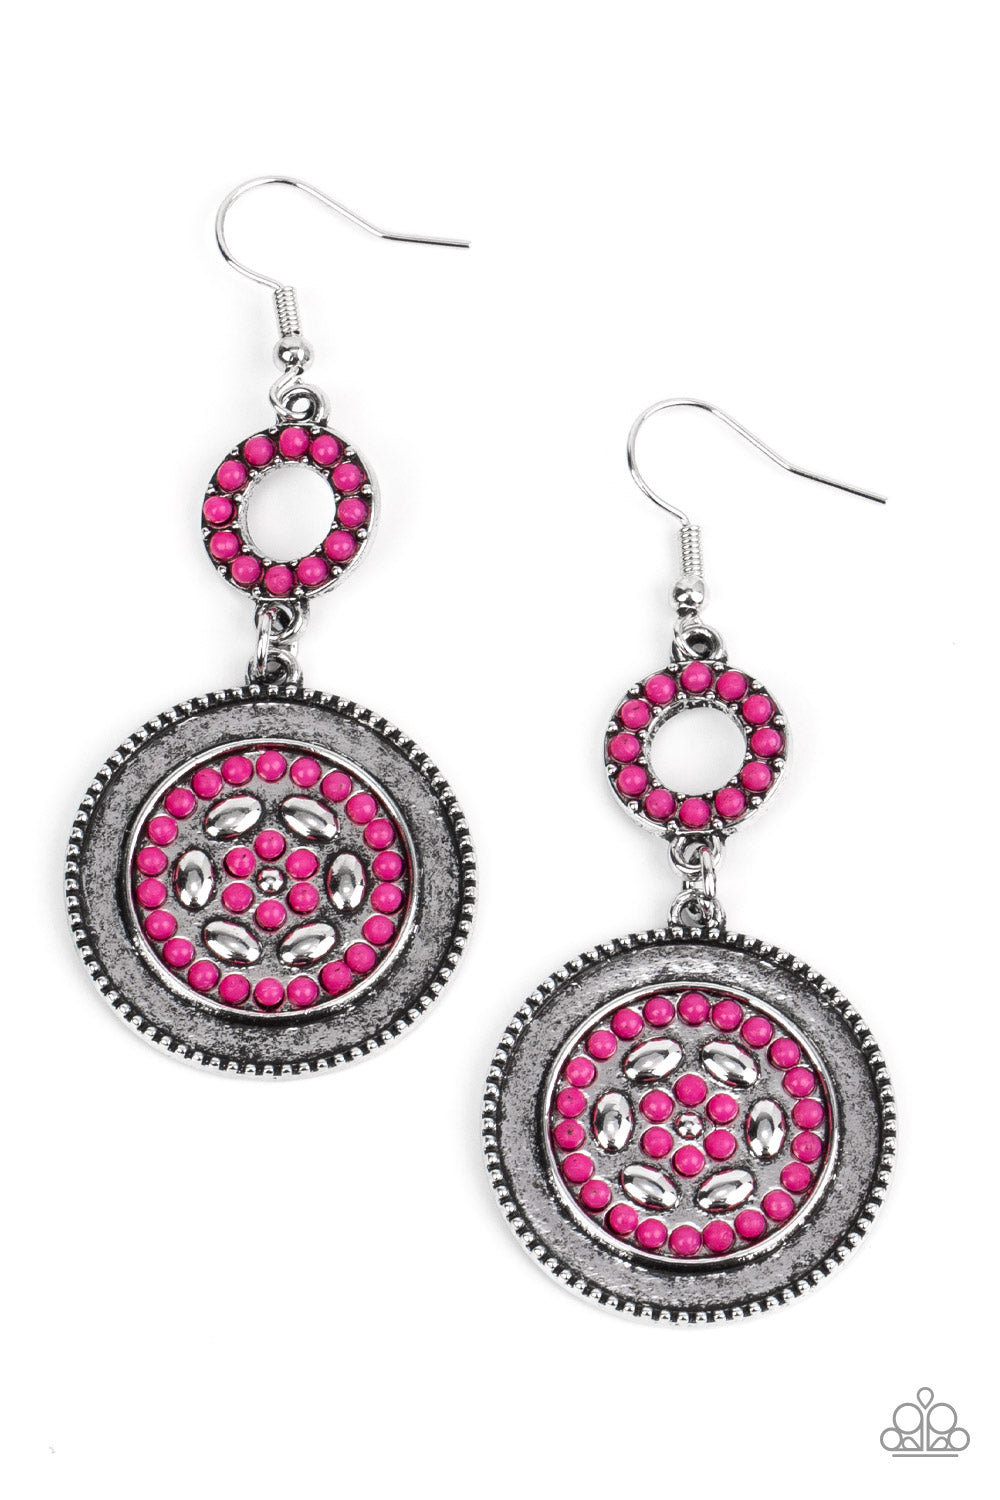 Meadow Mantra - Pink and Silver Earrings - Paparazzi Accessories - Dotted in dainty Fuchsia Fedora seed beads, a dainty silver hoop links to an ornate silver disc for a colorful floral finish. Earring attaches to a standard fishhook fitting. Sold as one pair of earrings.